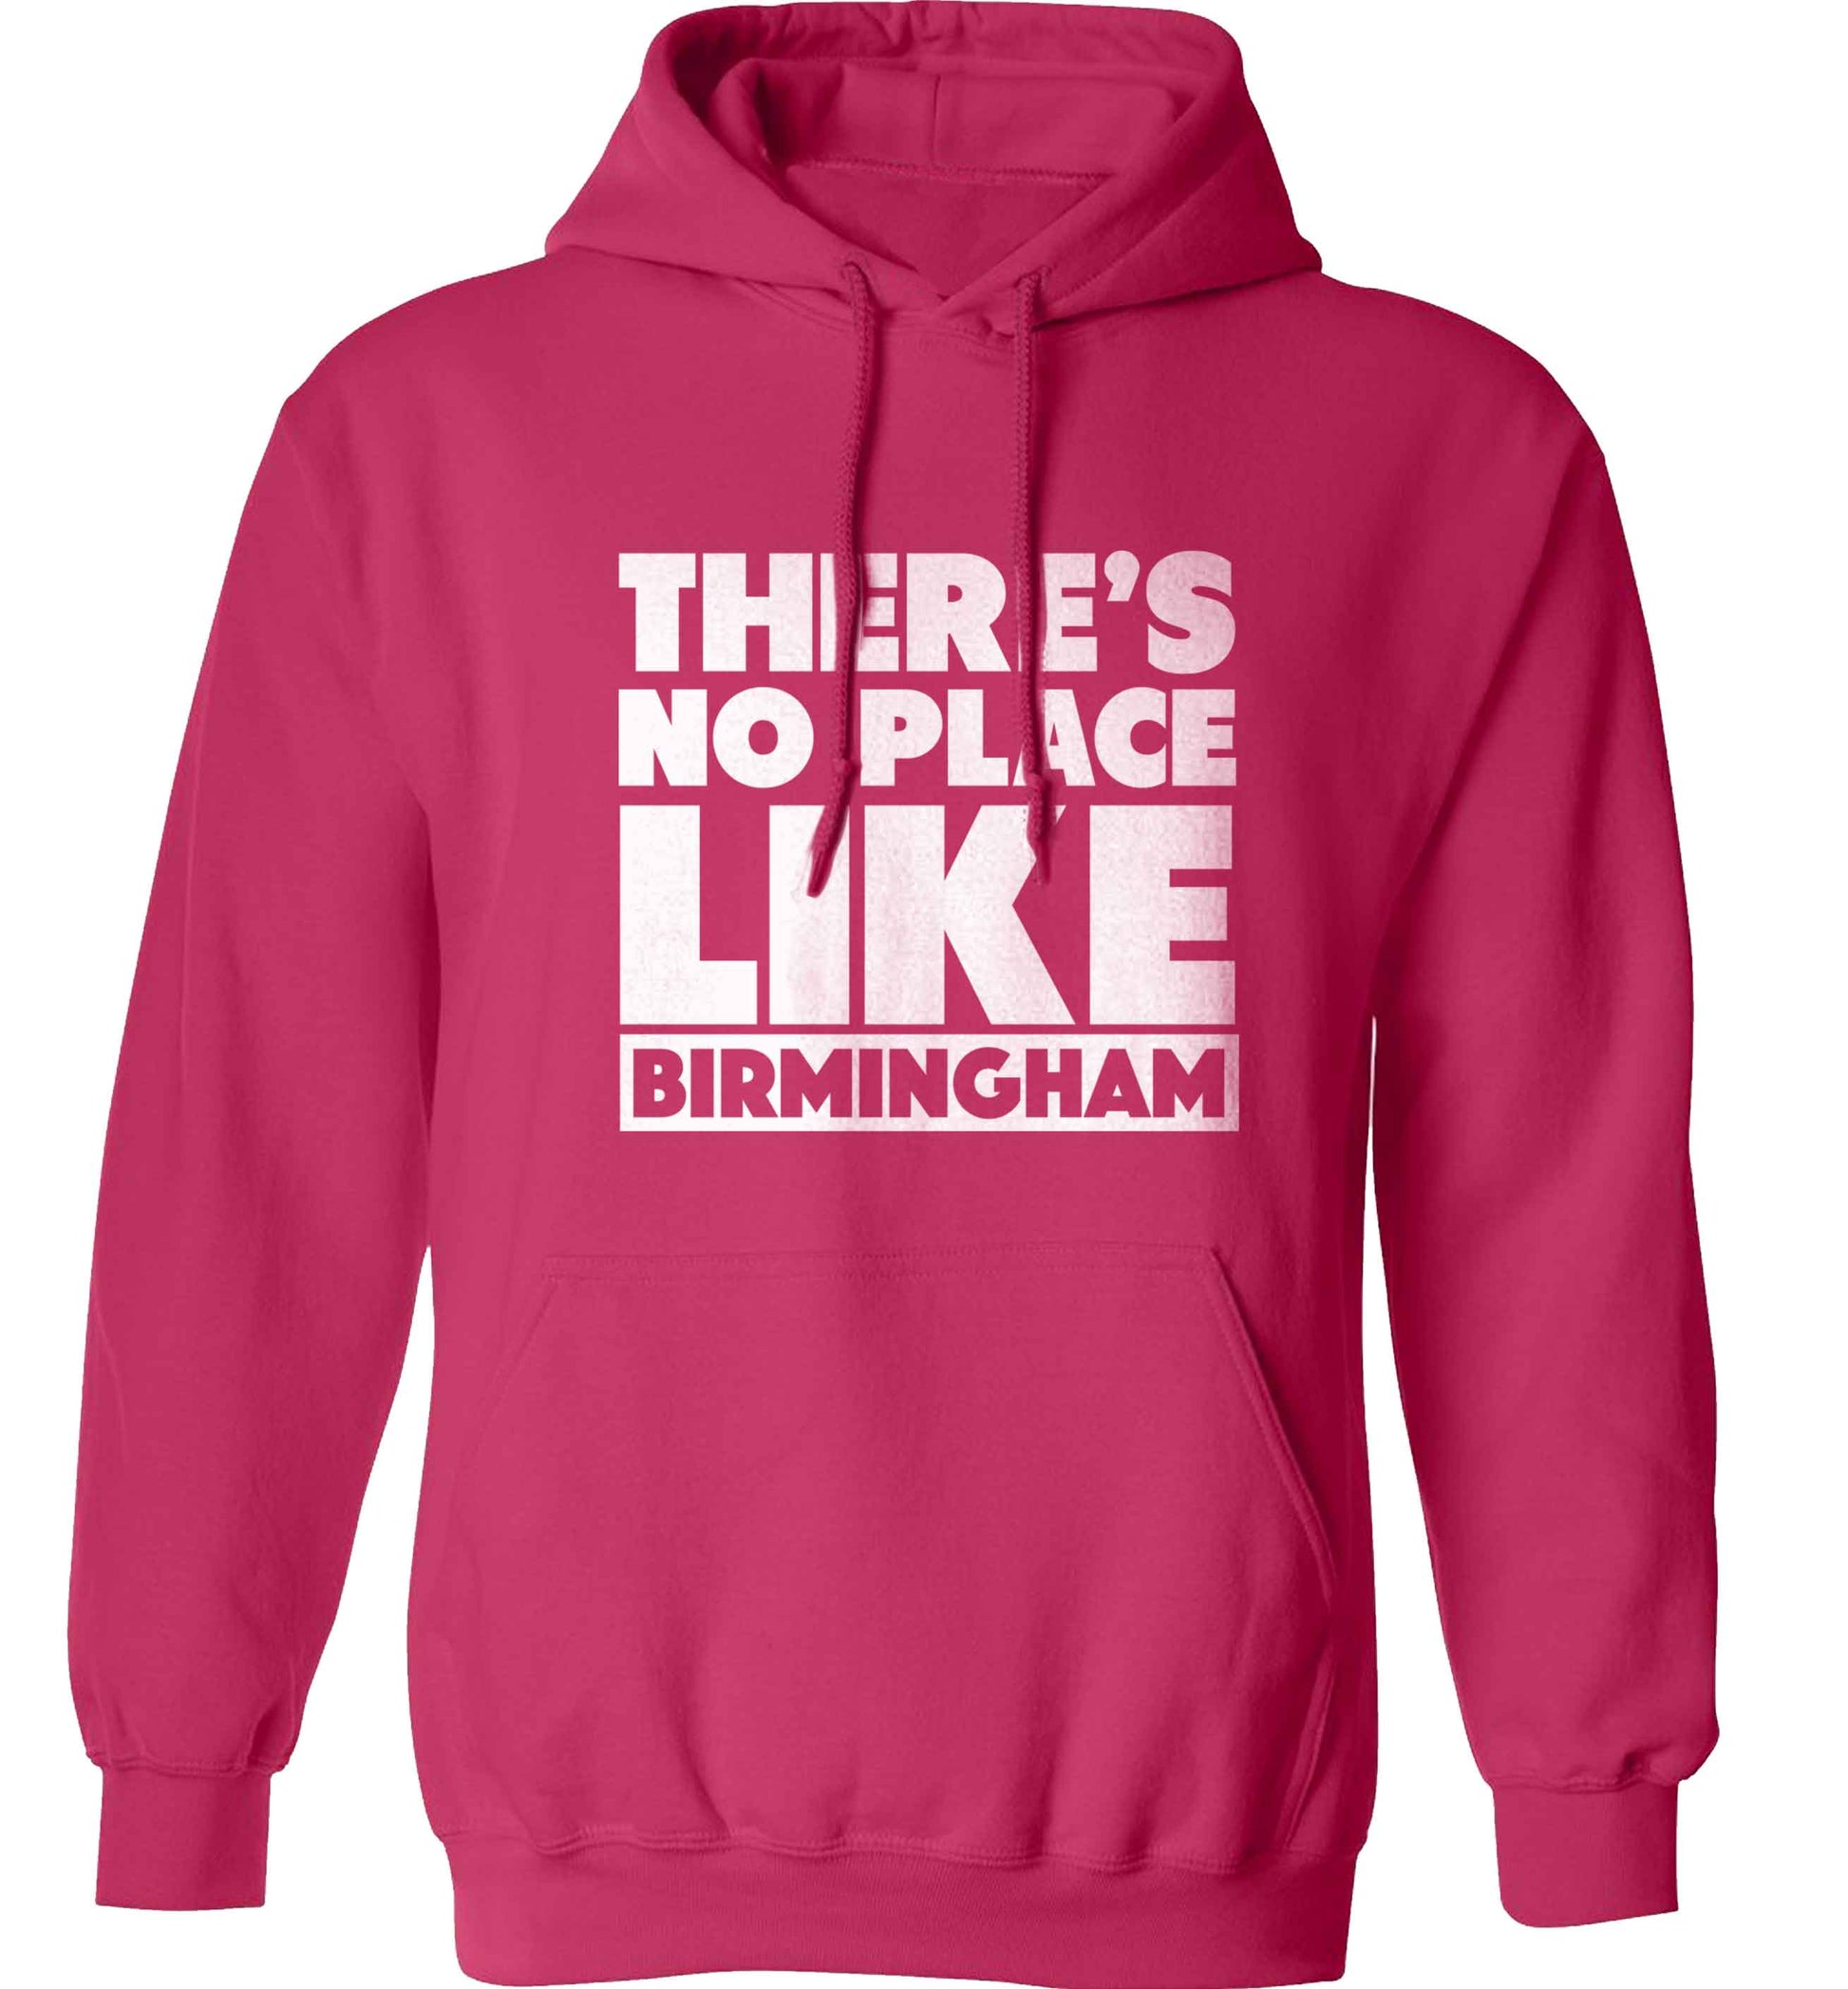 There's no place like Birmingham adults unisex pink hoodie 2XL